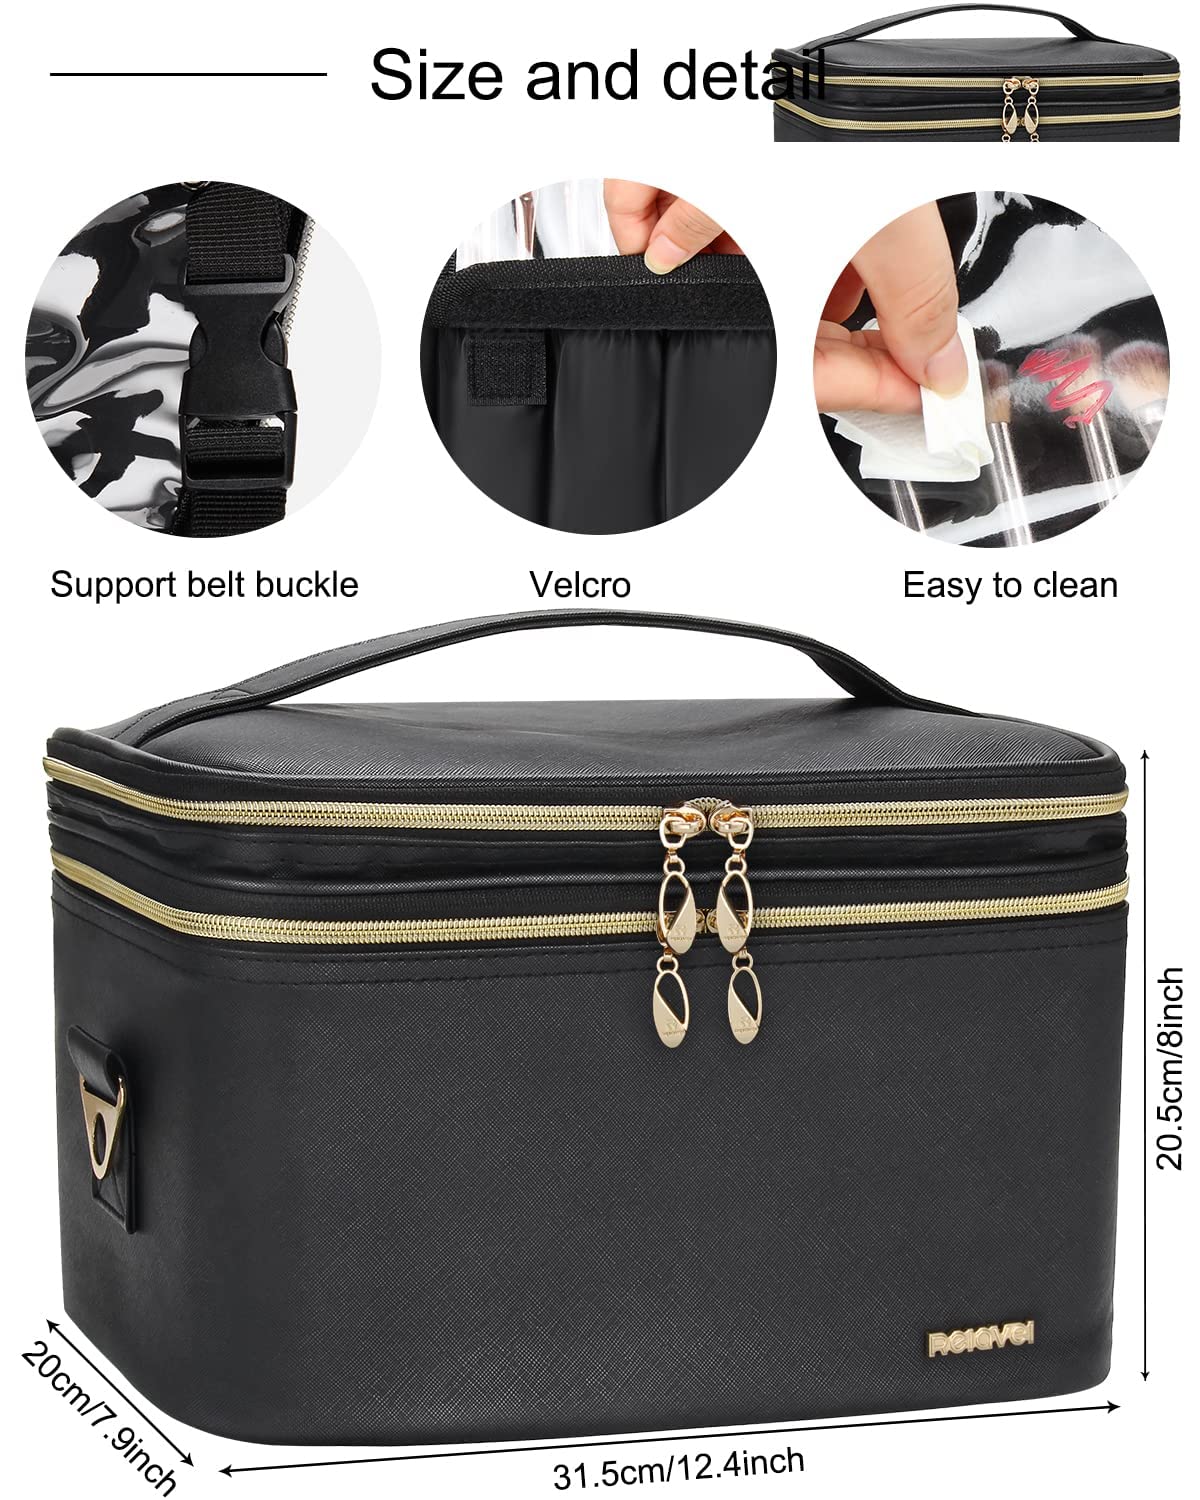 Relavel Makeup Bag Large, Professional Makeup Case Travel Cosmetic Bags Makeup Brush Holder Organizer, Storage Upright Design, Insulated Compartment, Waterproof PU Leather and Lining (Black)